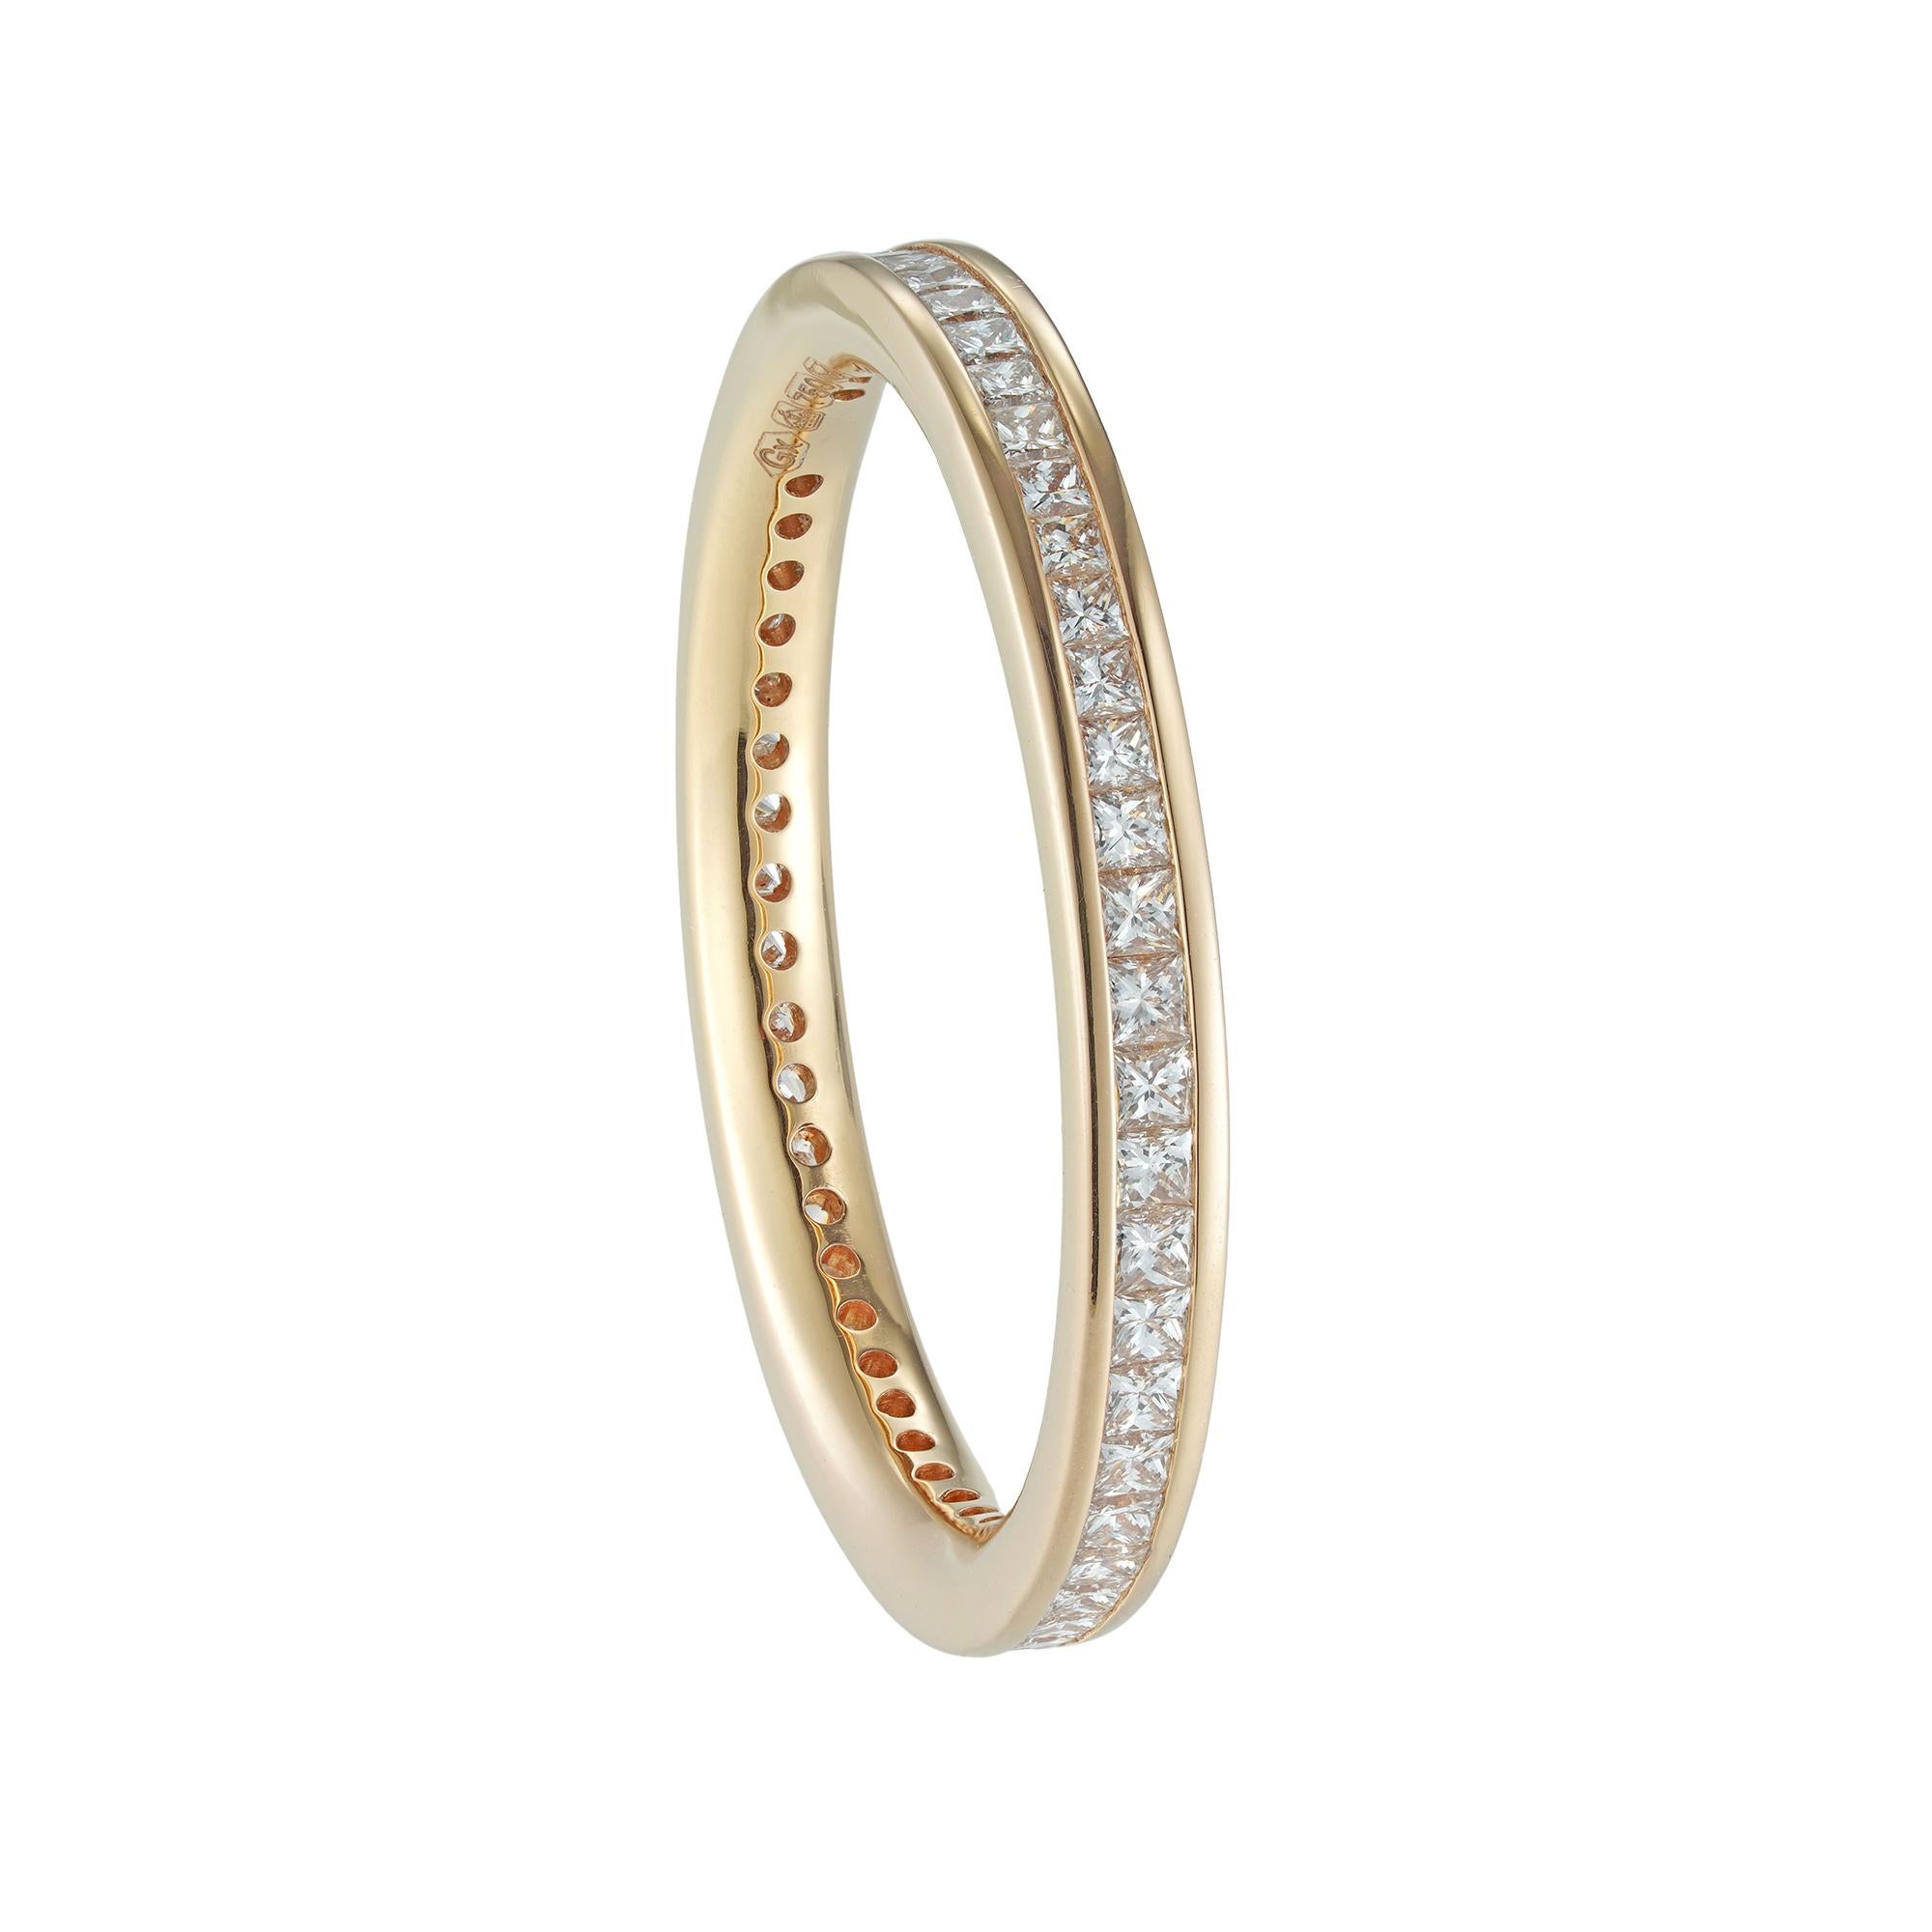 A diamond full eternity ring, the princess-cut diamonds weighing 0.62 carats in total, all channel-set in rose gold mount, hallmarked 18ct gold London, measuring approximately 2.3mm wide, finger size M ½, gross weight 2.3 grams.

A charming